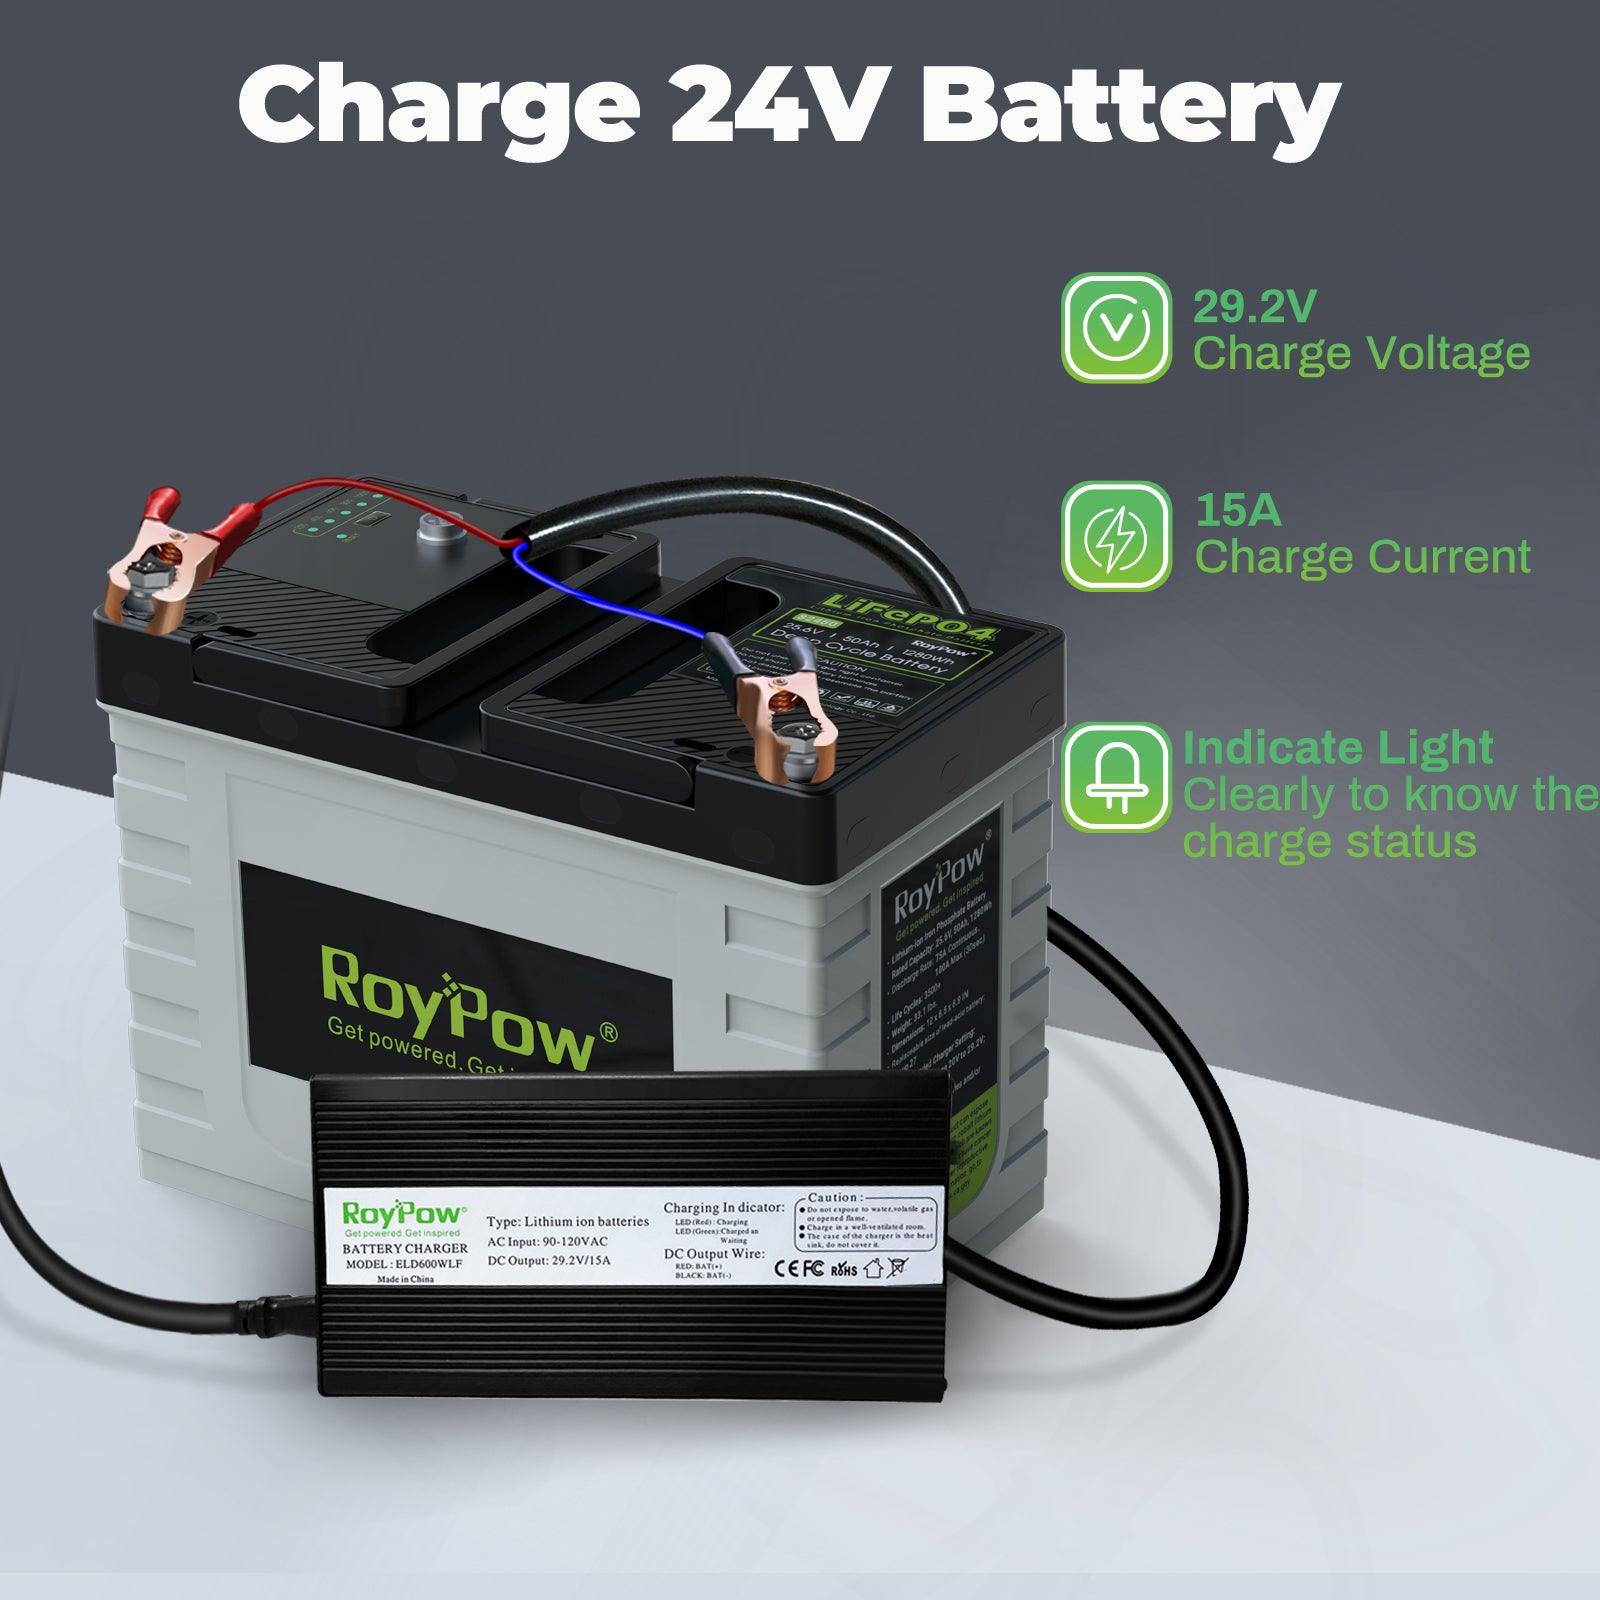 RoyPow 29.2V-15A P085MI LiFePO4 Battery charger